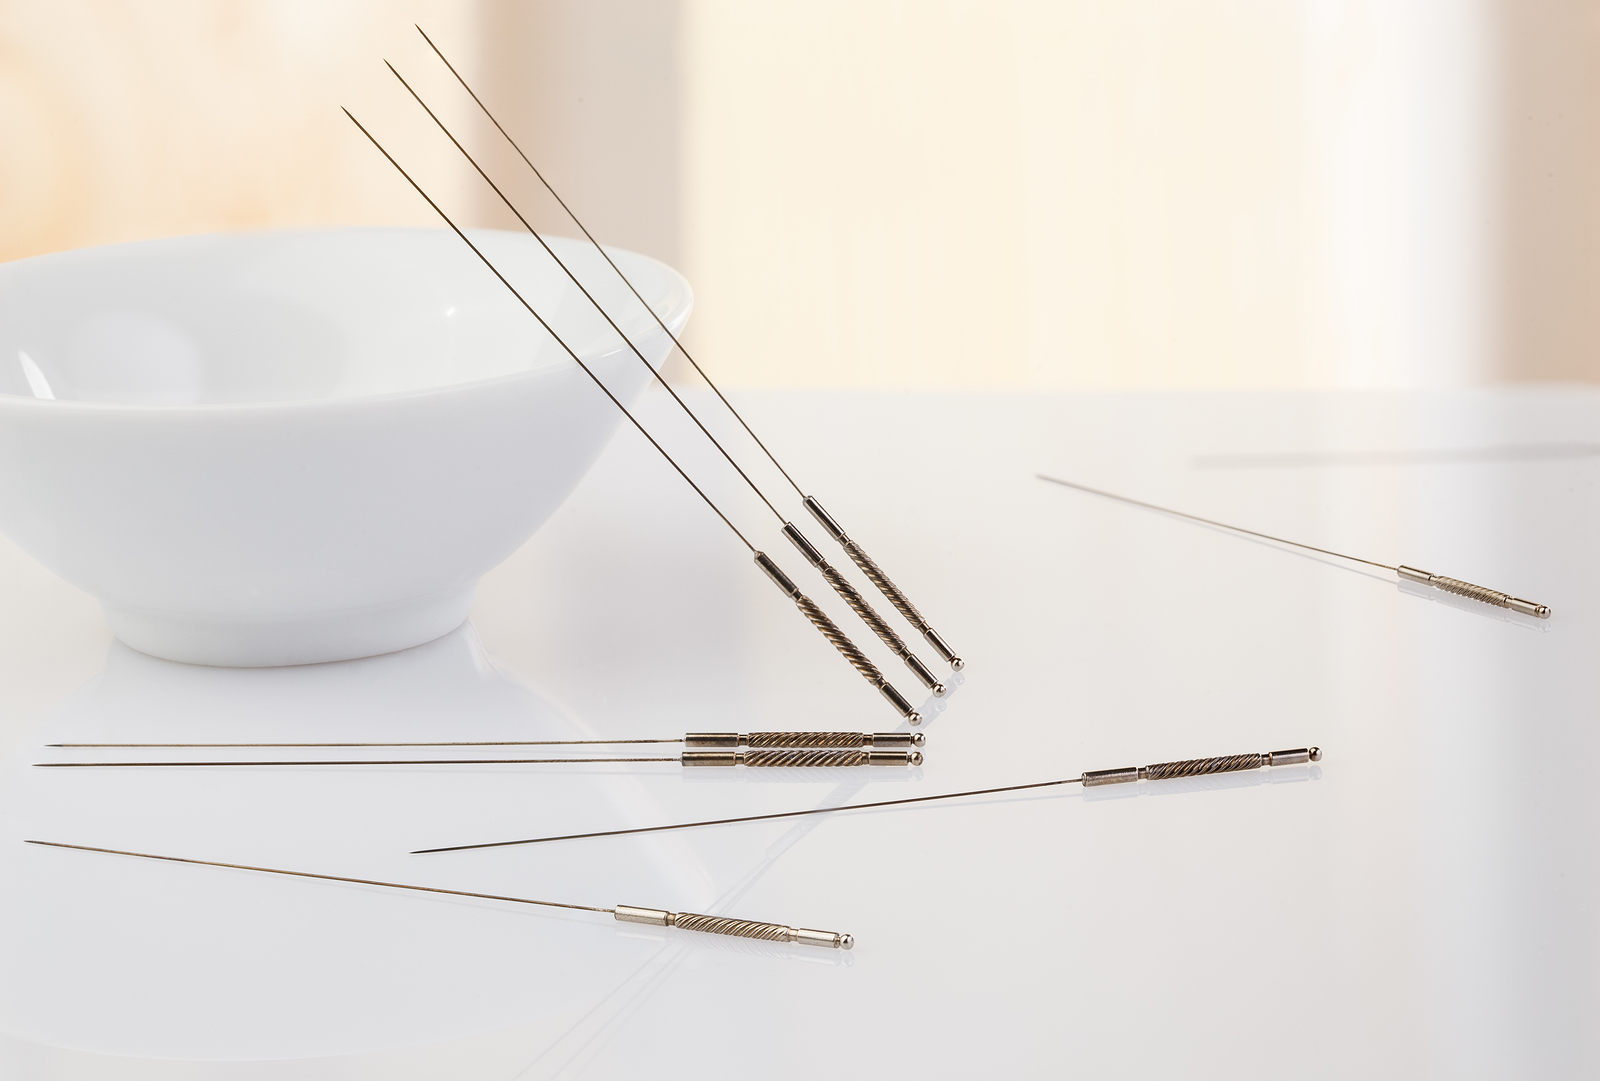 Bill in Congress would force Medicare to cover Acupuncture